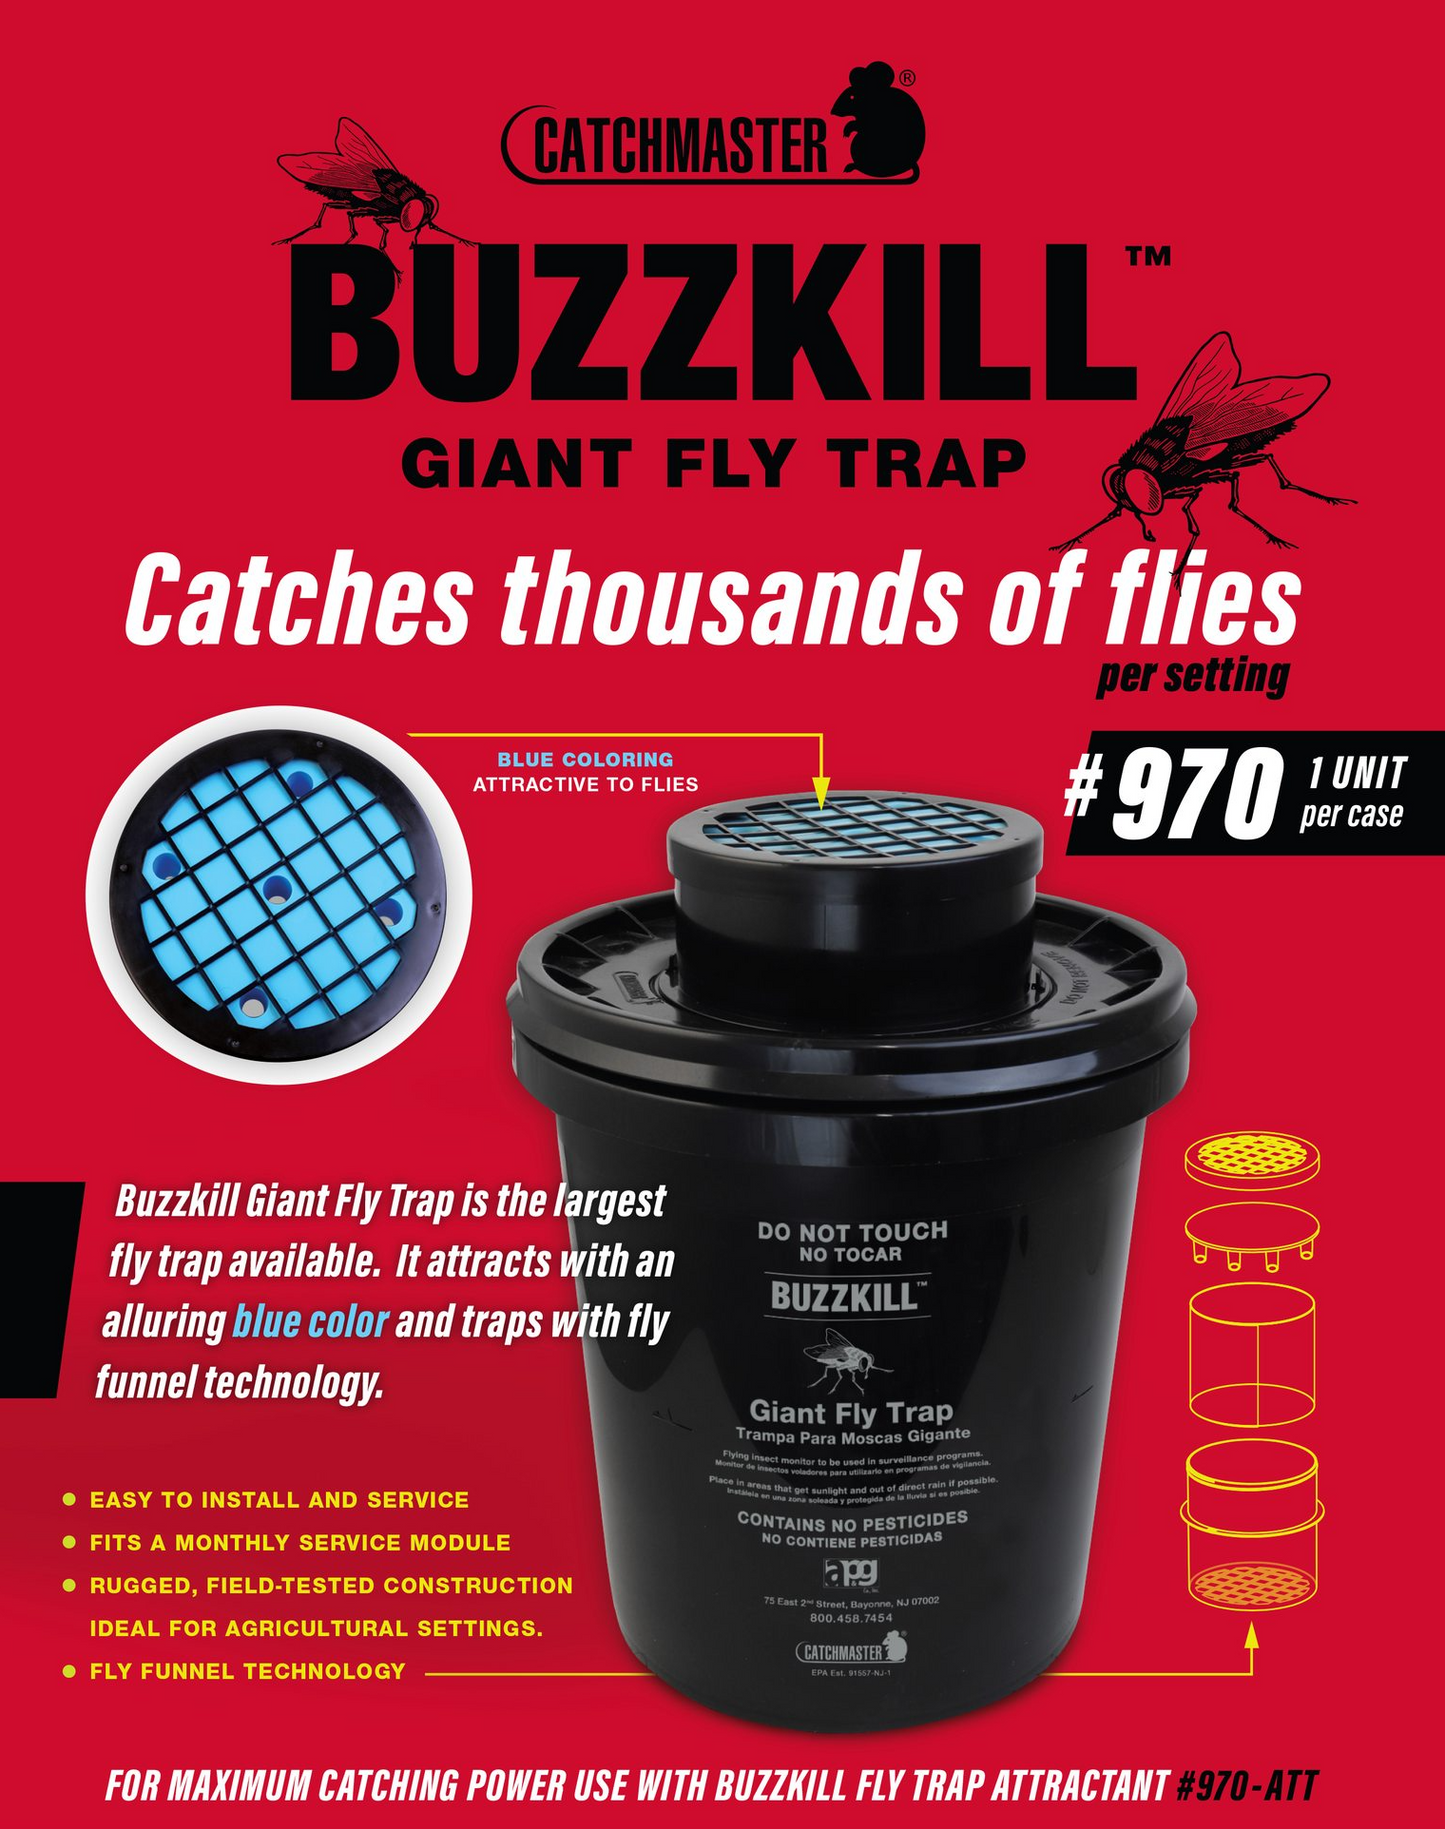 Catchmaster, Buzzkill Giant Fly Trap with 1 Trap and 2 Attractants